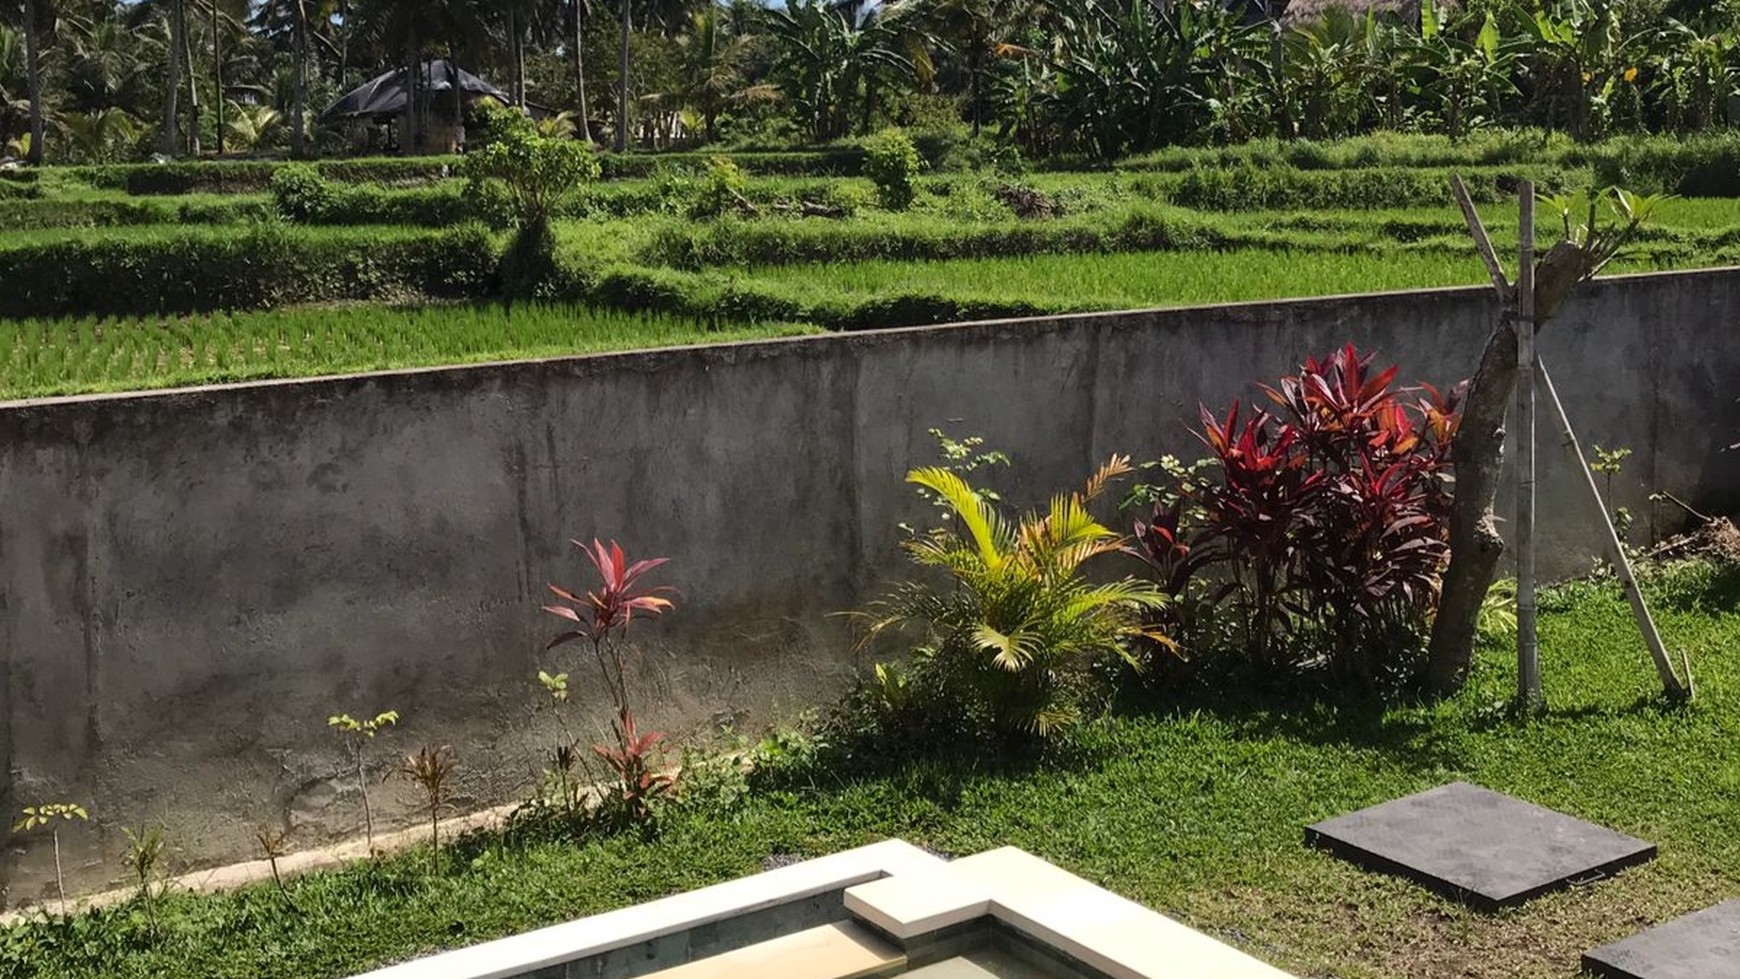 2 Bedroom Leasehold Villa with Rice Field View for Sale Located 5 Minutes from Ubud Center